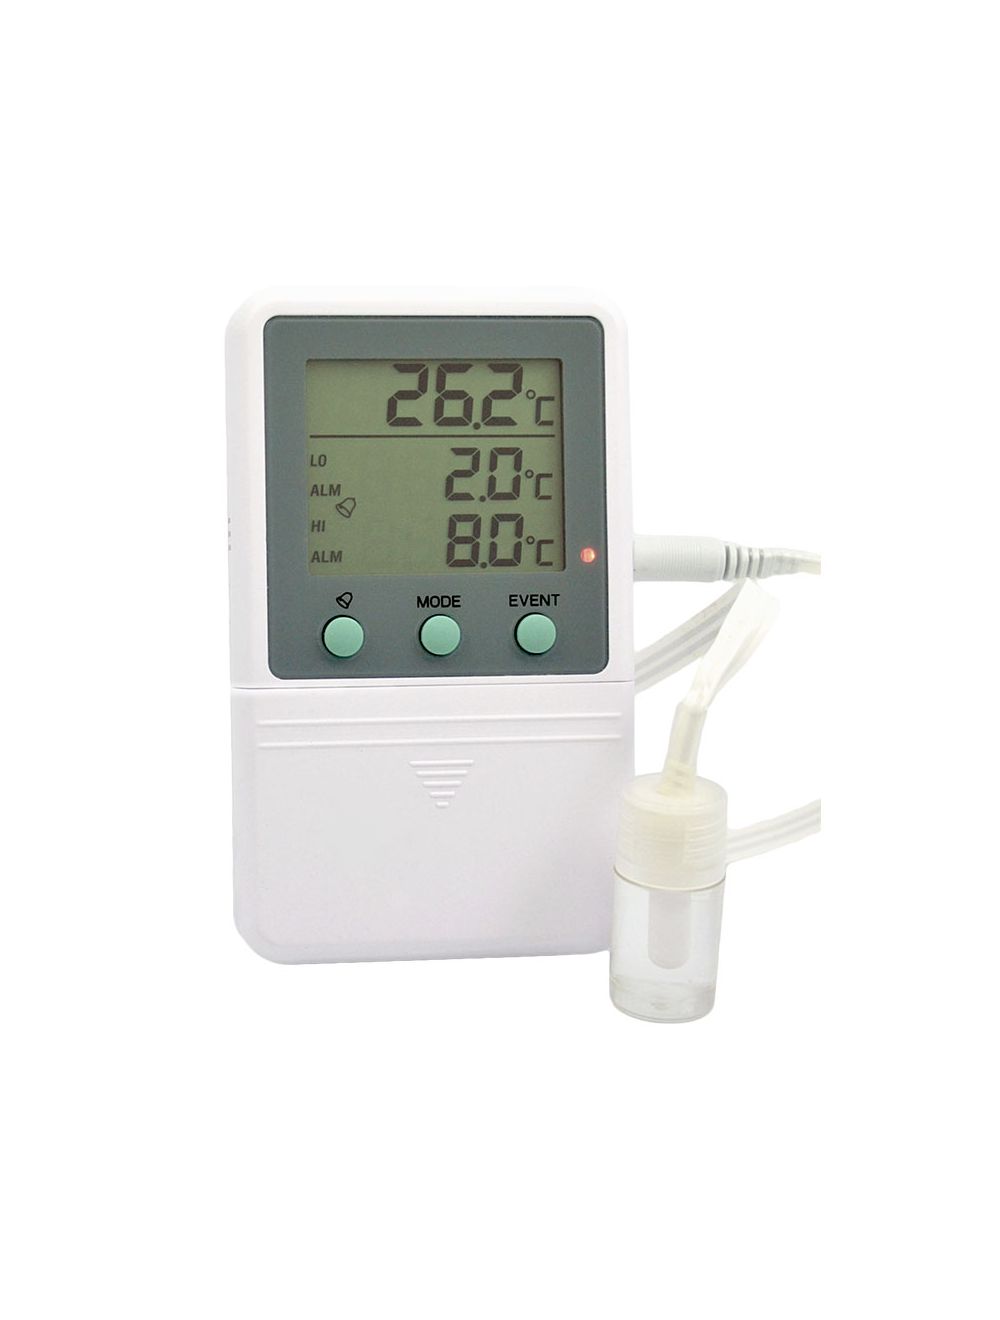 Refrigerator/Freezer Thermometer Serialized and Traceable , -50 To